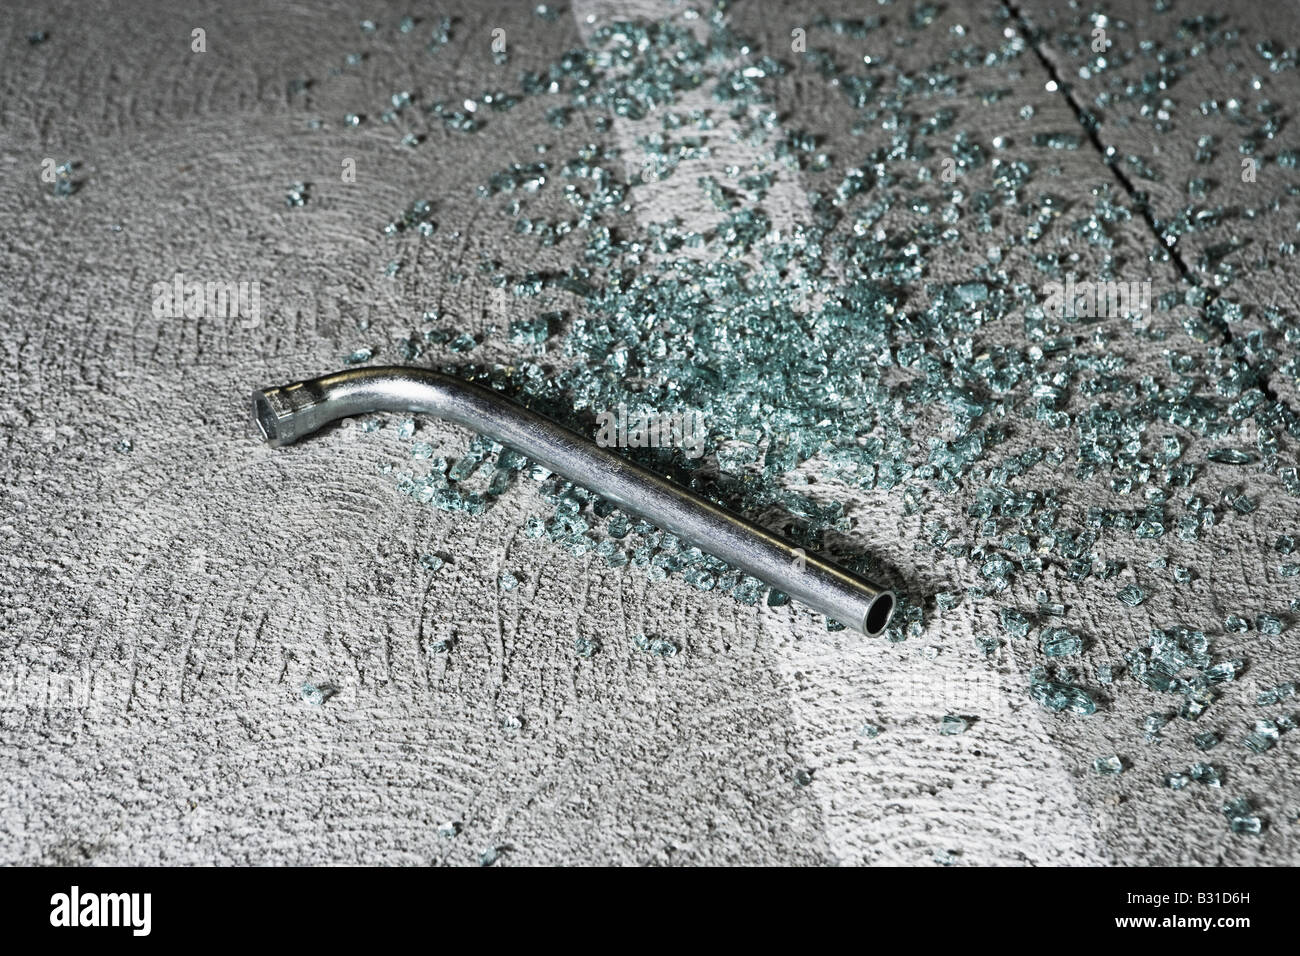 Crowbar and broken glass in car park Stock Photo